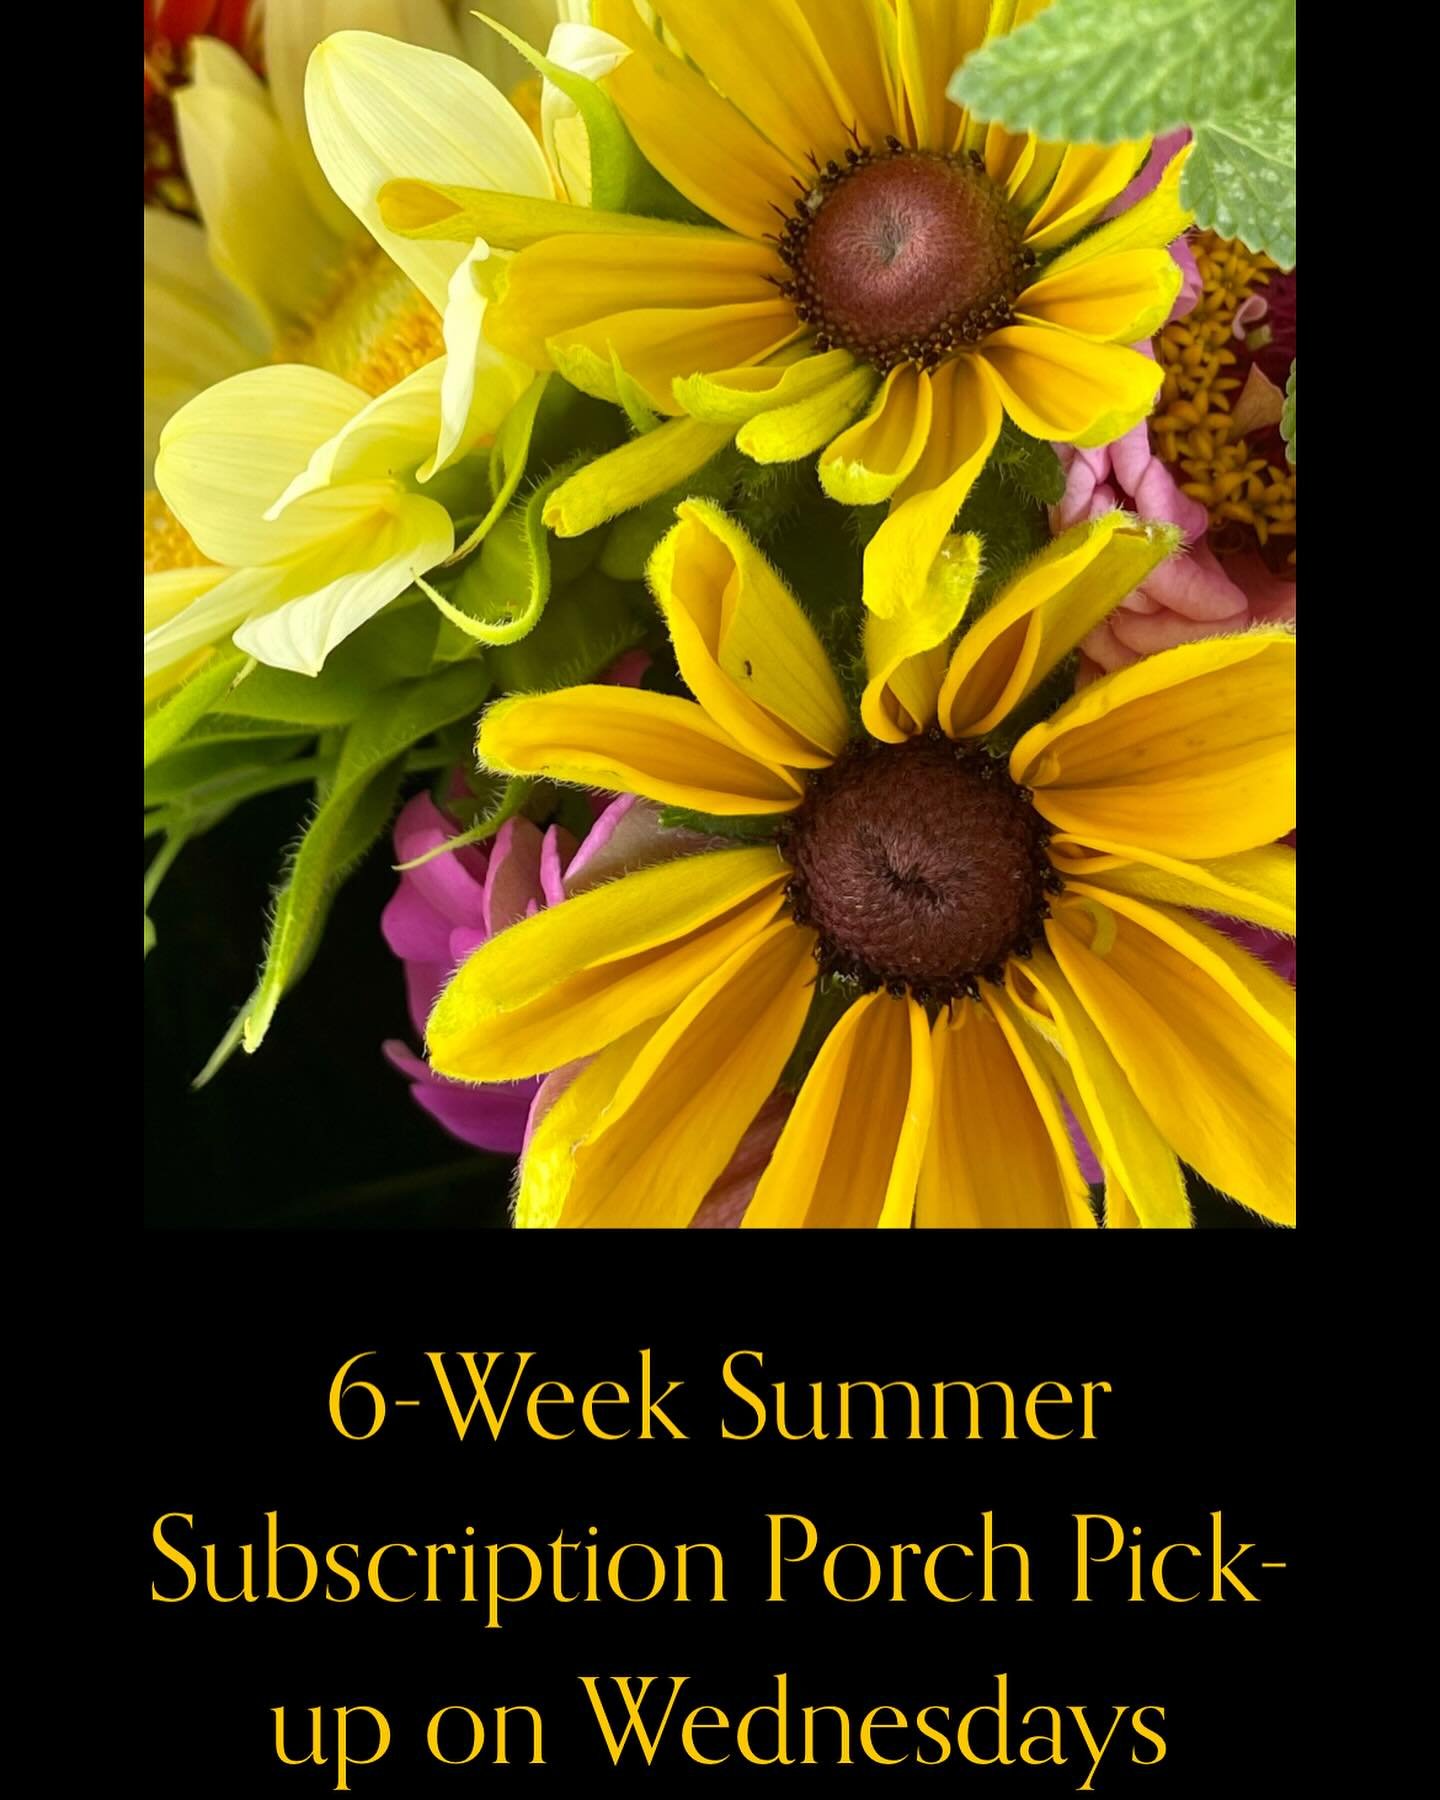 So excited to say that Saturday subscriptions have SOLD OUT! But no worries if you still want to get Mom SIX bouquets of flowers for Mother&rsquo;s Day. Six-week summer subscriptions are now available for pick-up on Wednesdays. Head to the website an